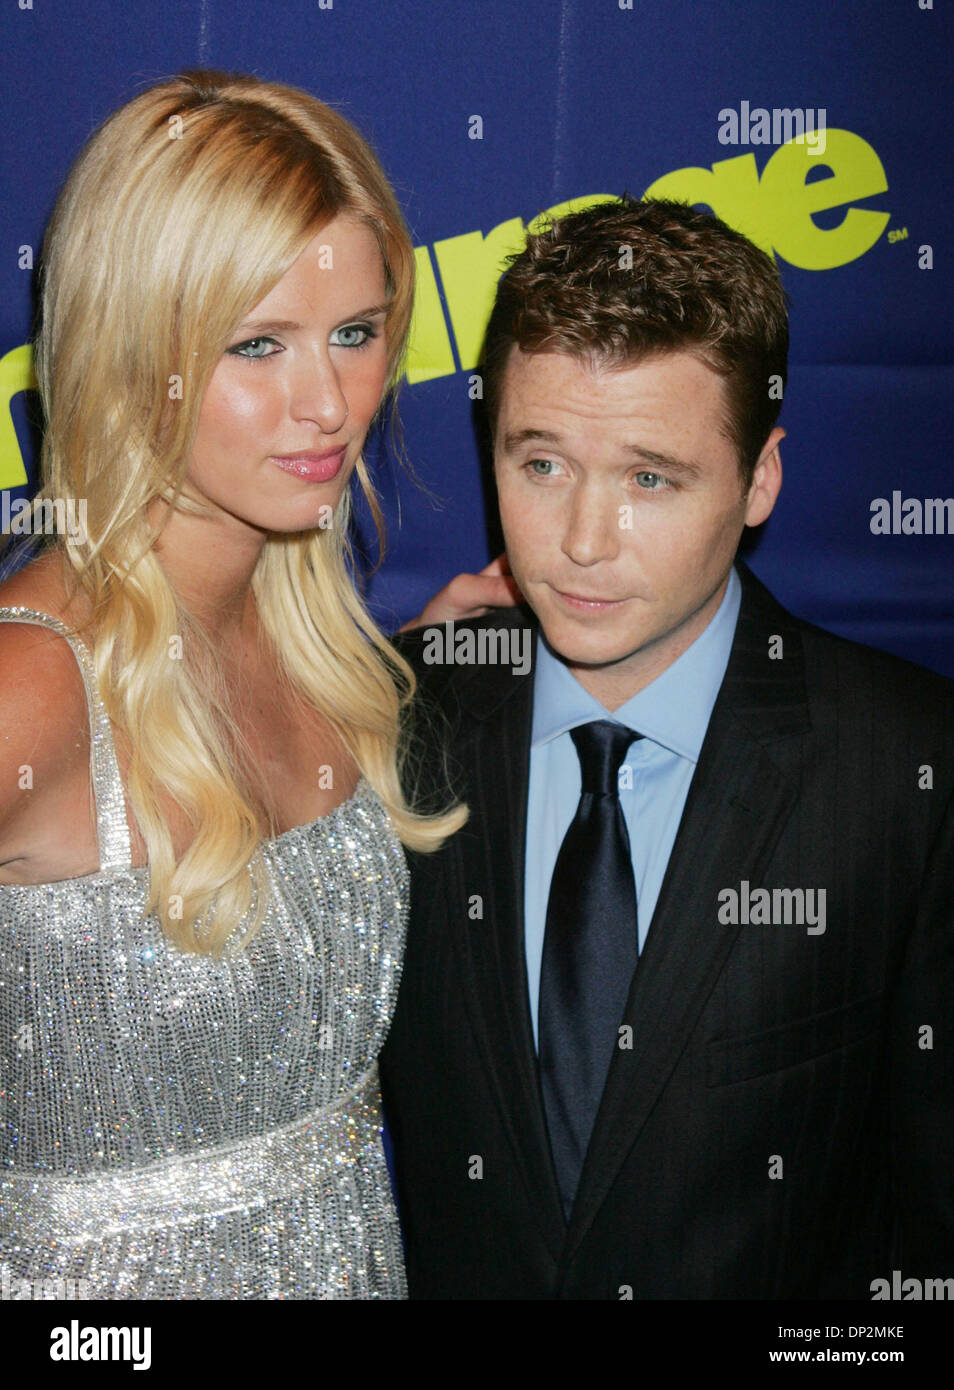 Jun 07, 2006; New York, NY, USA; Socialite NICKY HILTON  and actor KEVIN CONNOLLY at the arrivals for the 3rd season New York  premiere of HBO's 'Entourage' held at the Skirball Center for the Performing Arts at New York University. Mandatory Credit: Photo by Nancy Kaszerman/ZUMA Press. (©) Copyright 2006 by Nancy Kaszerman Stock Photo